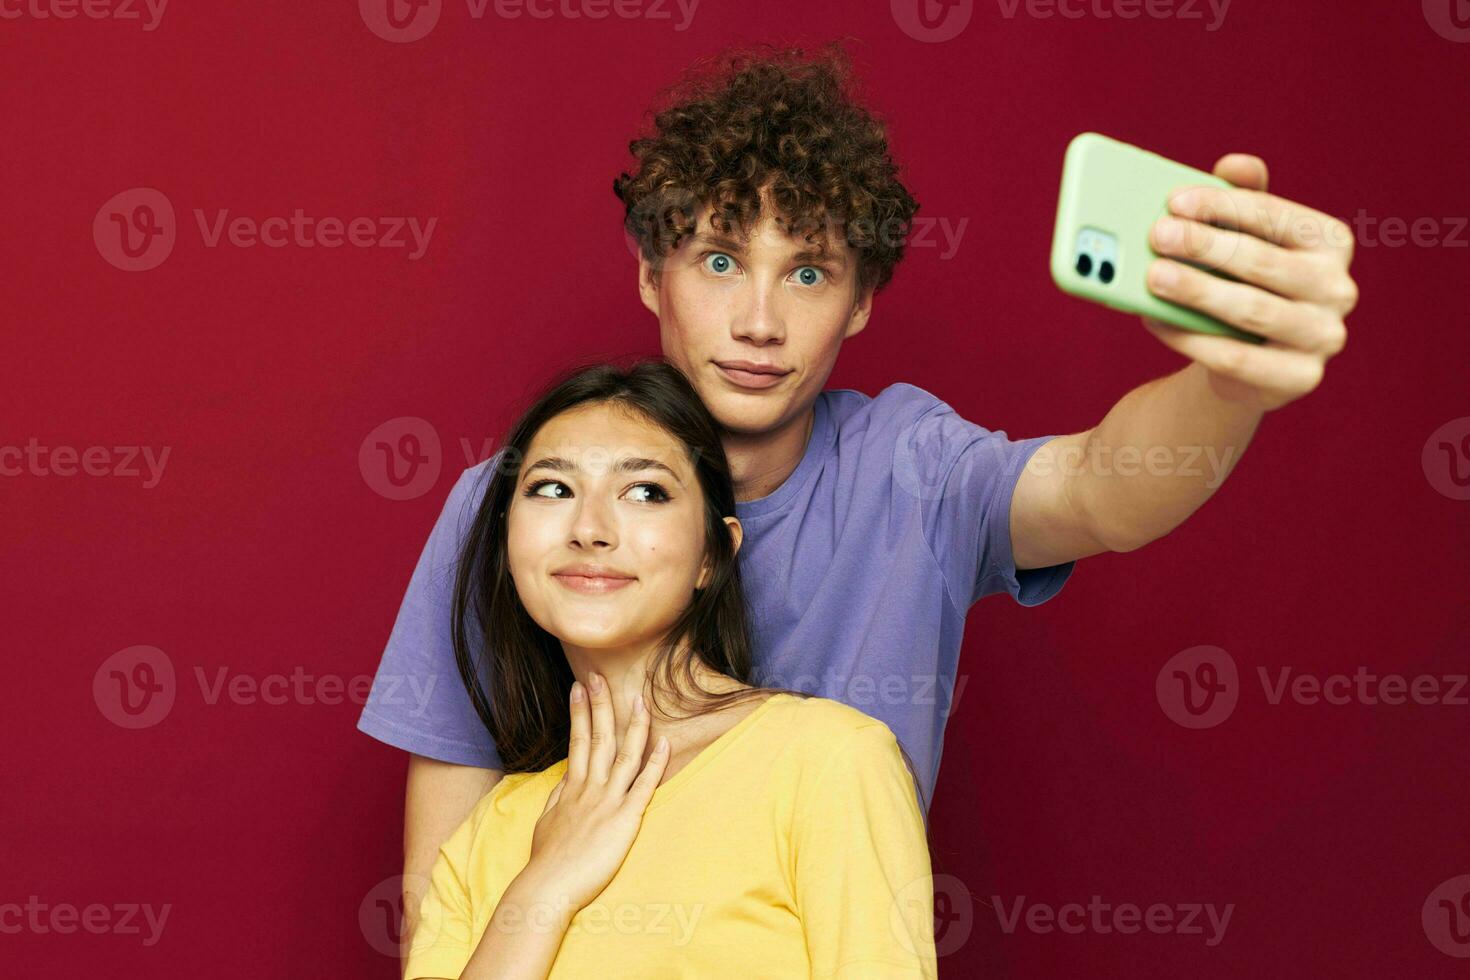 a young couple modern style emotions fun phone Youth style photo